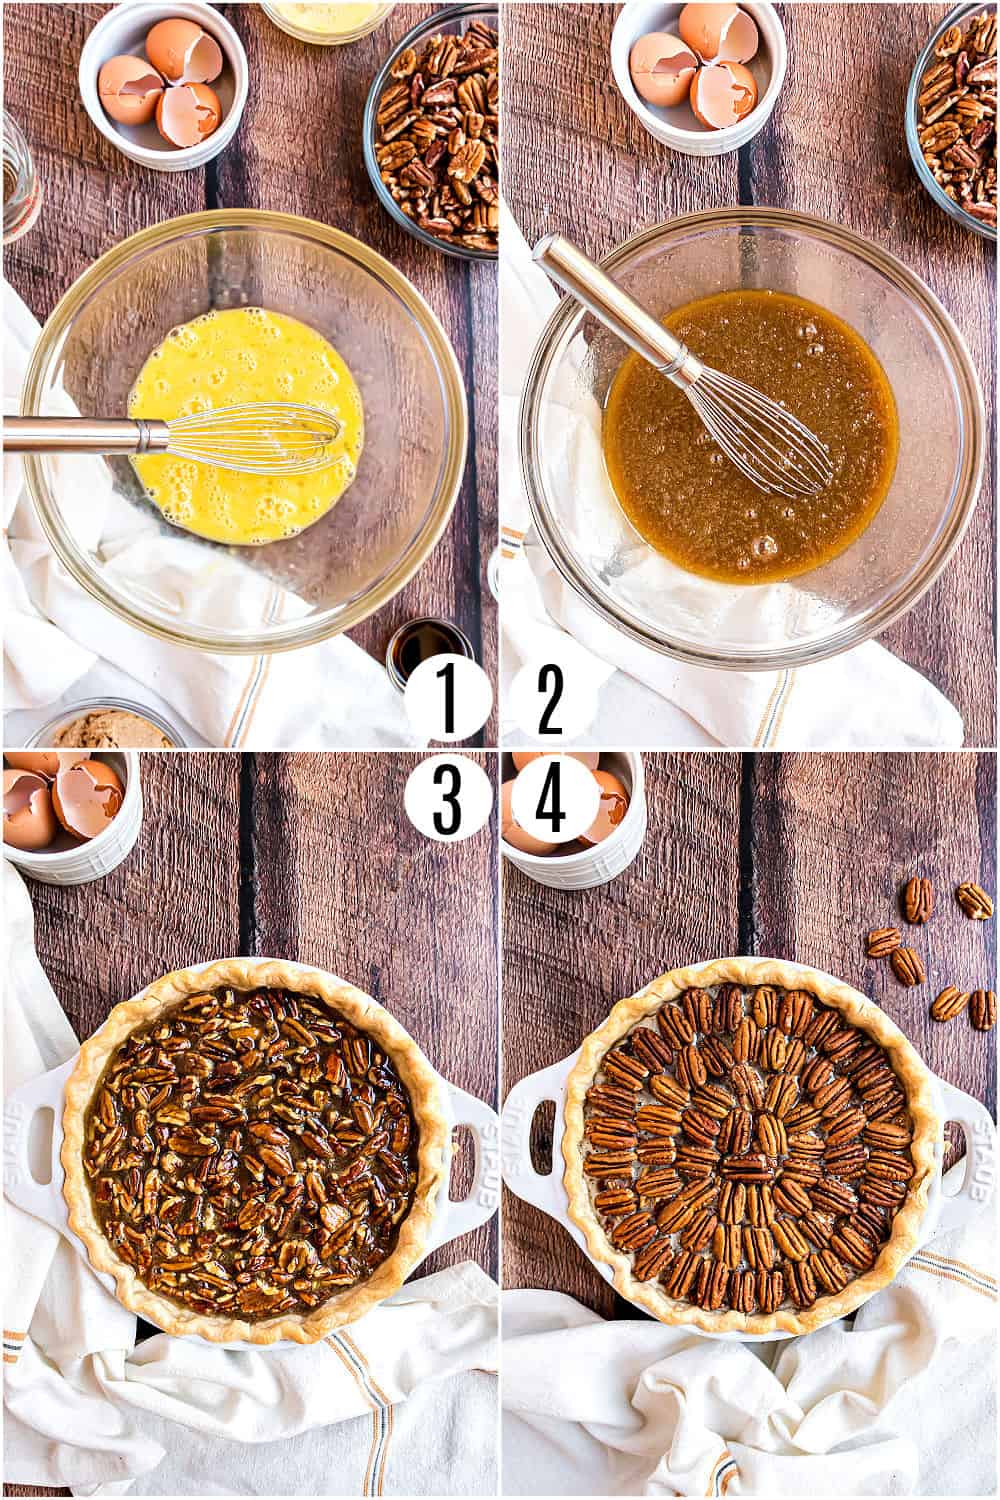 Step by step photos showing how to make pecan pie.